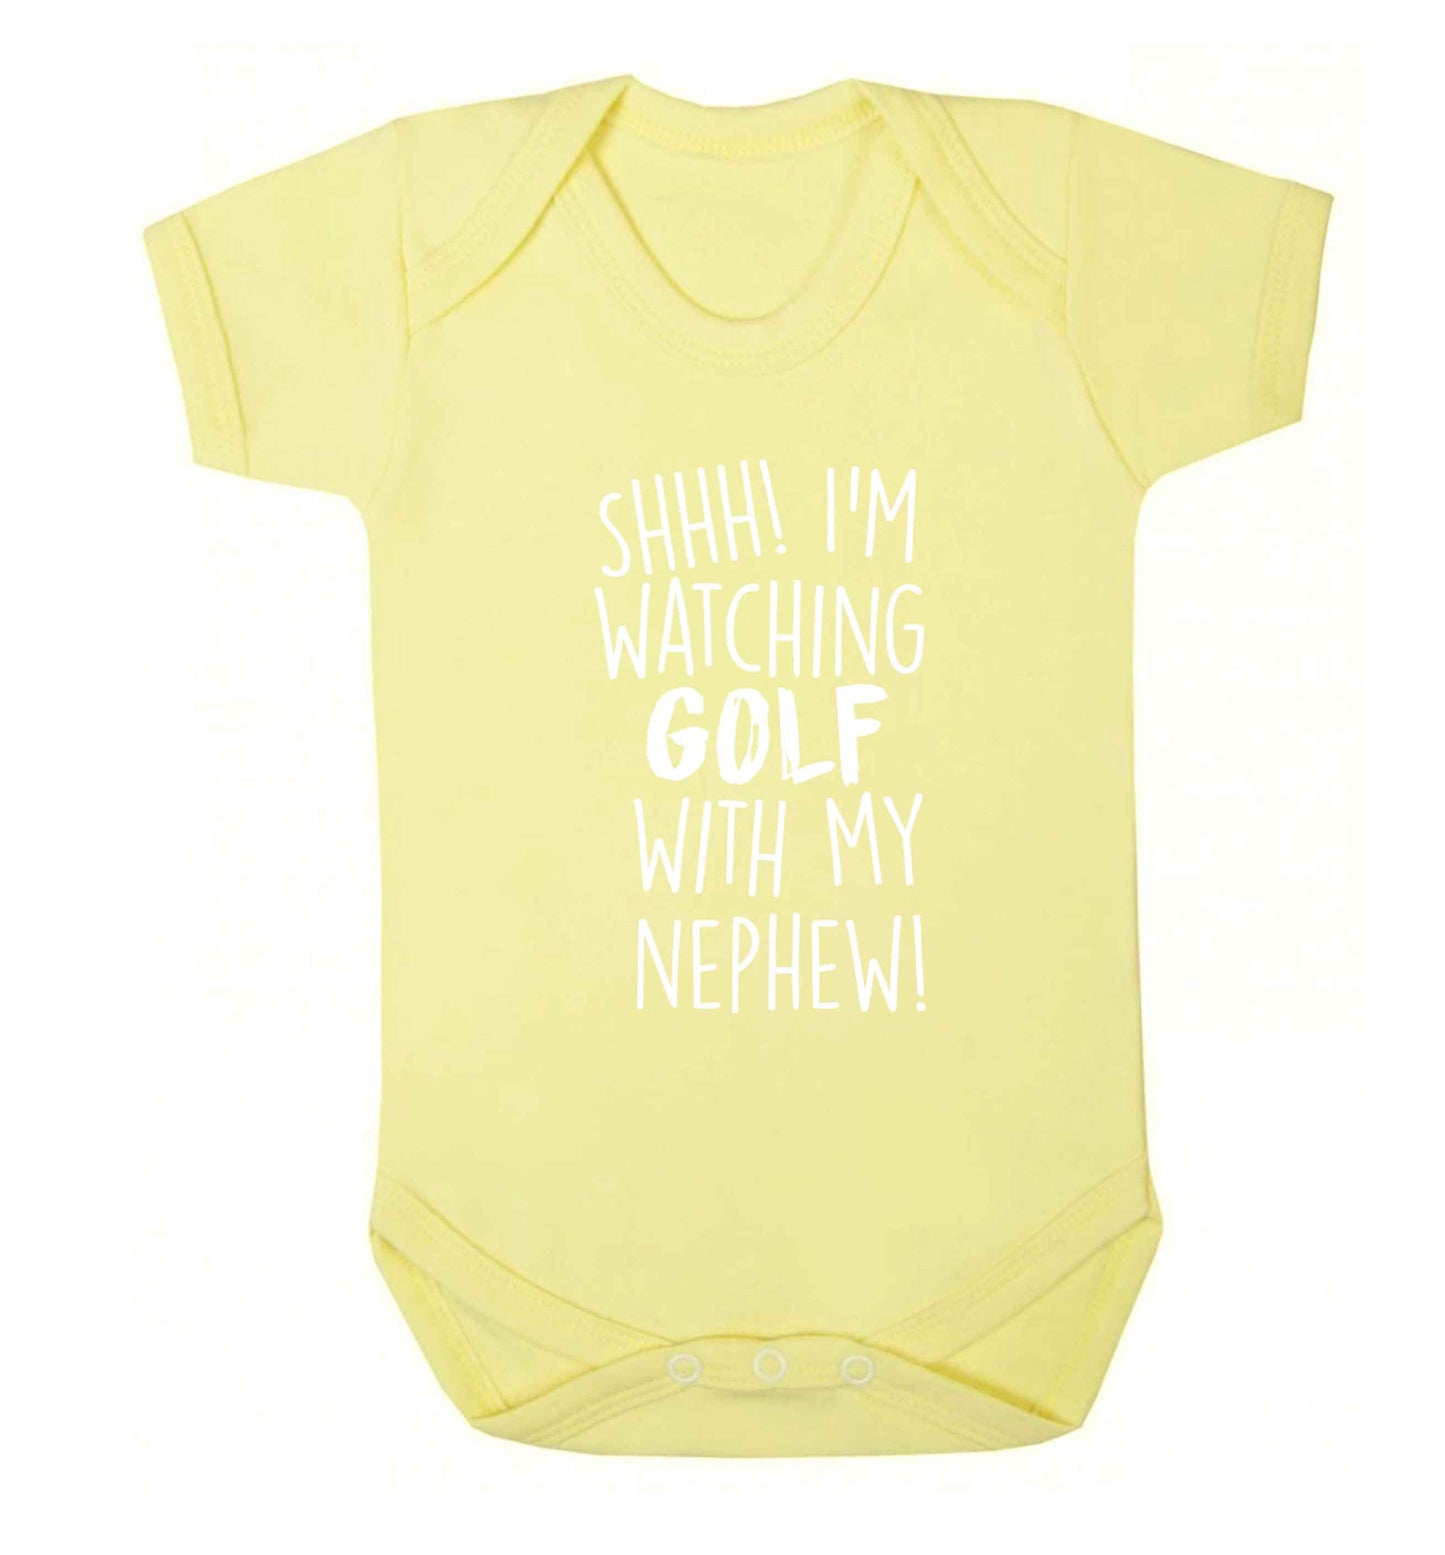 Shh I'm watching golf with my nephew Baby Vest pale yellow 18-24 months